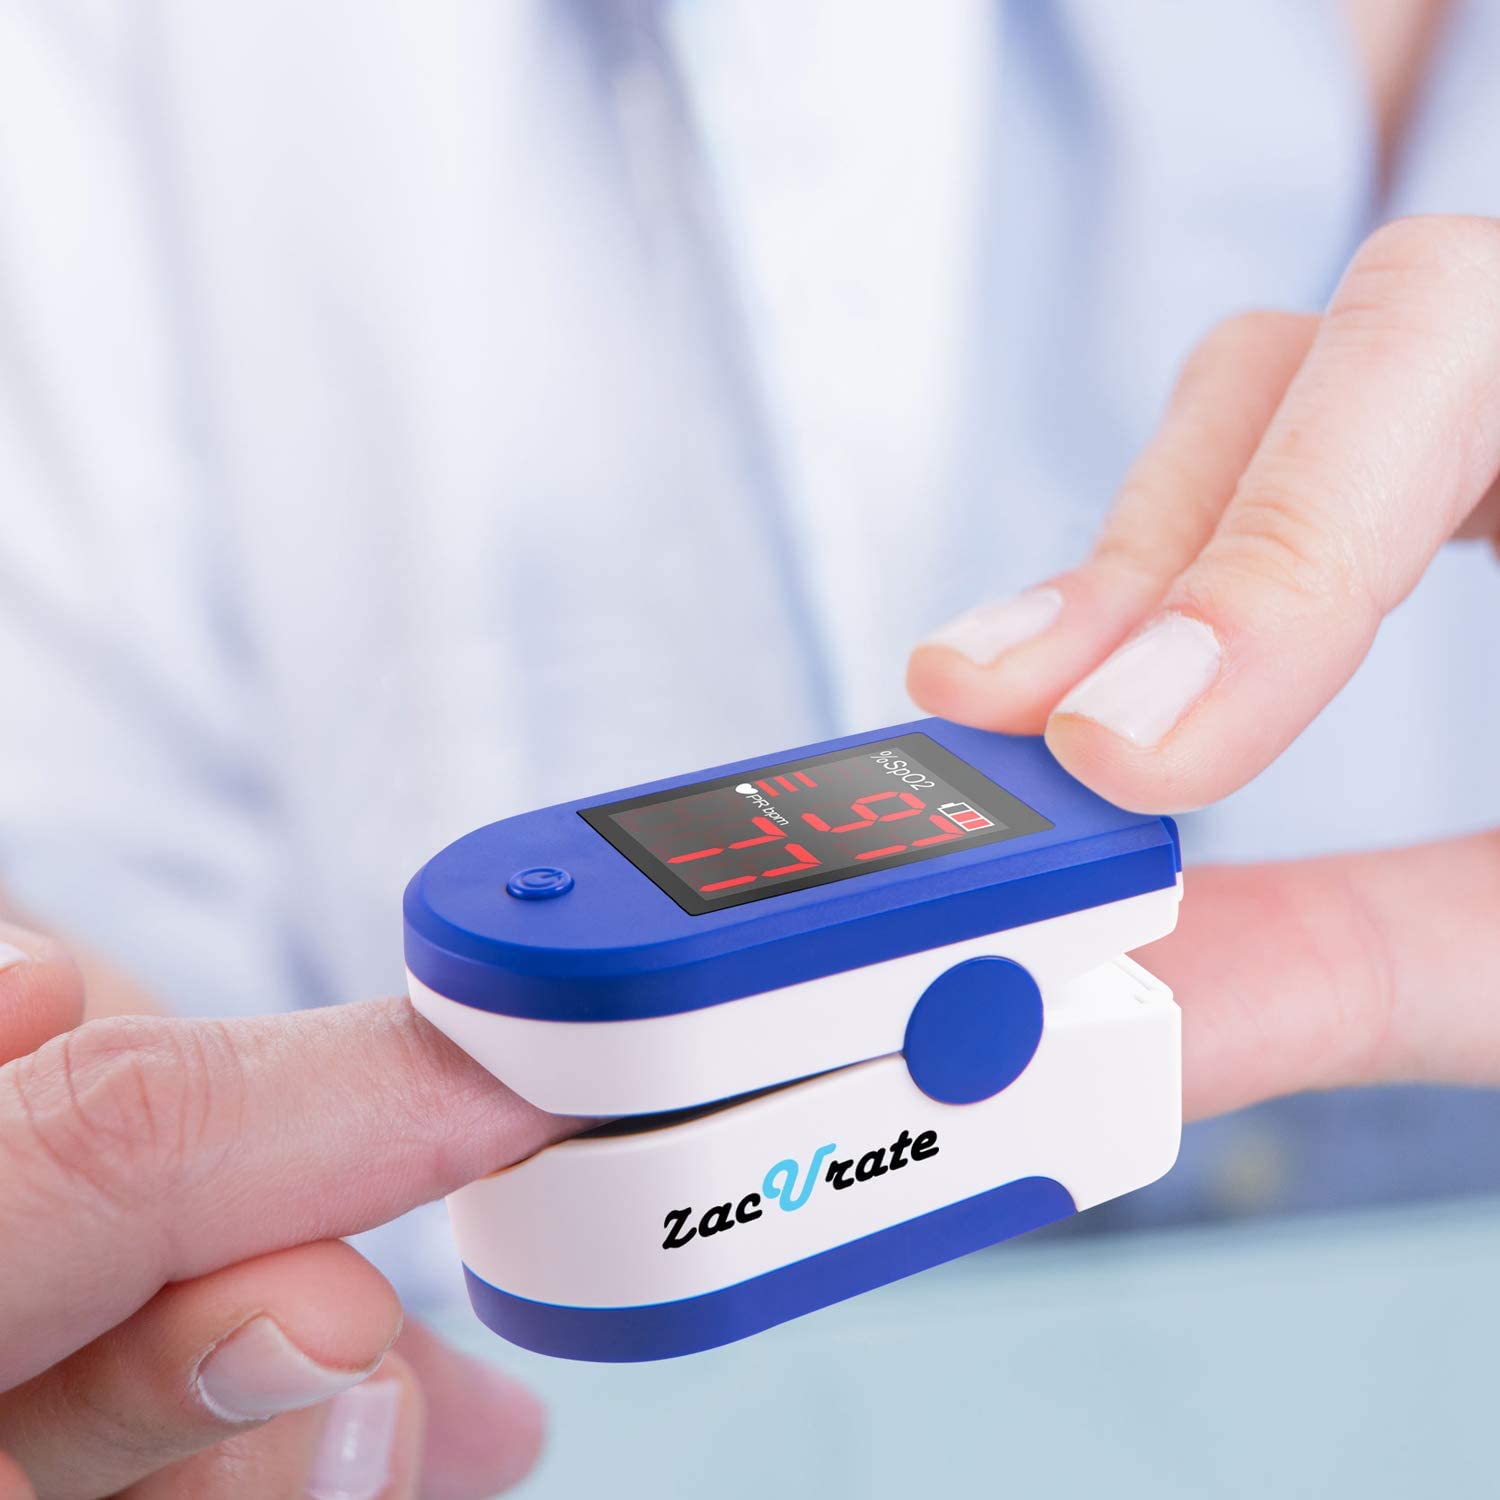  Zacurate 500CL Series Pulse Oximeter being used on a finger 